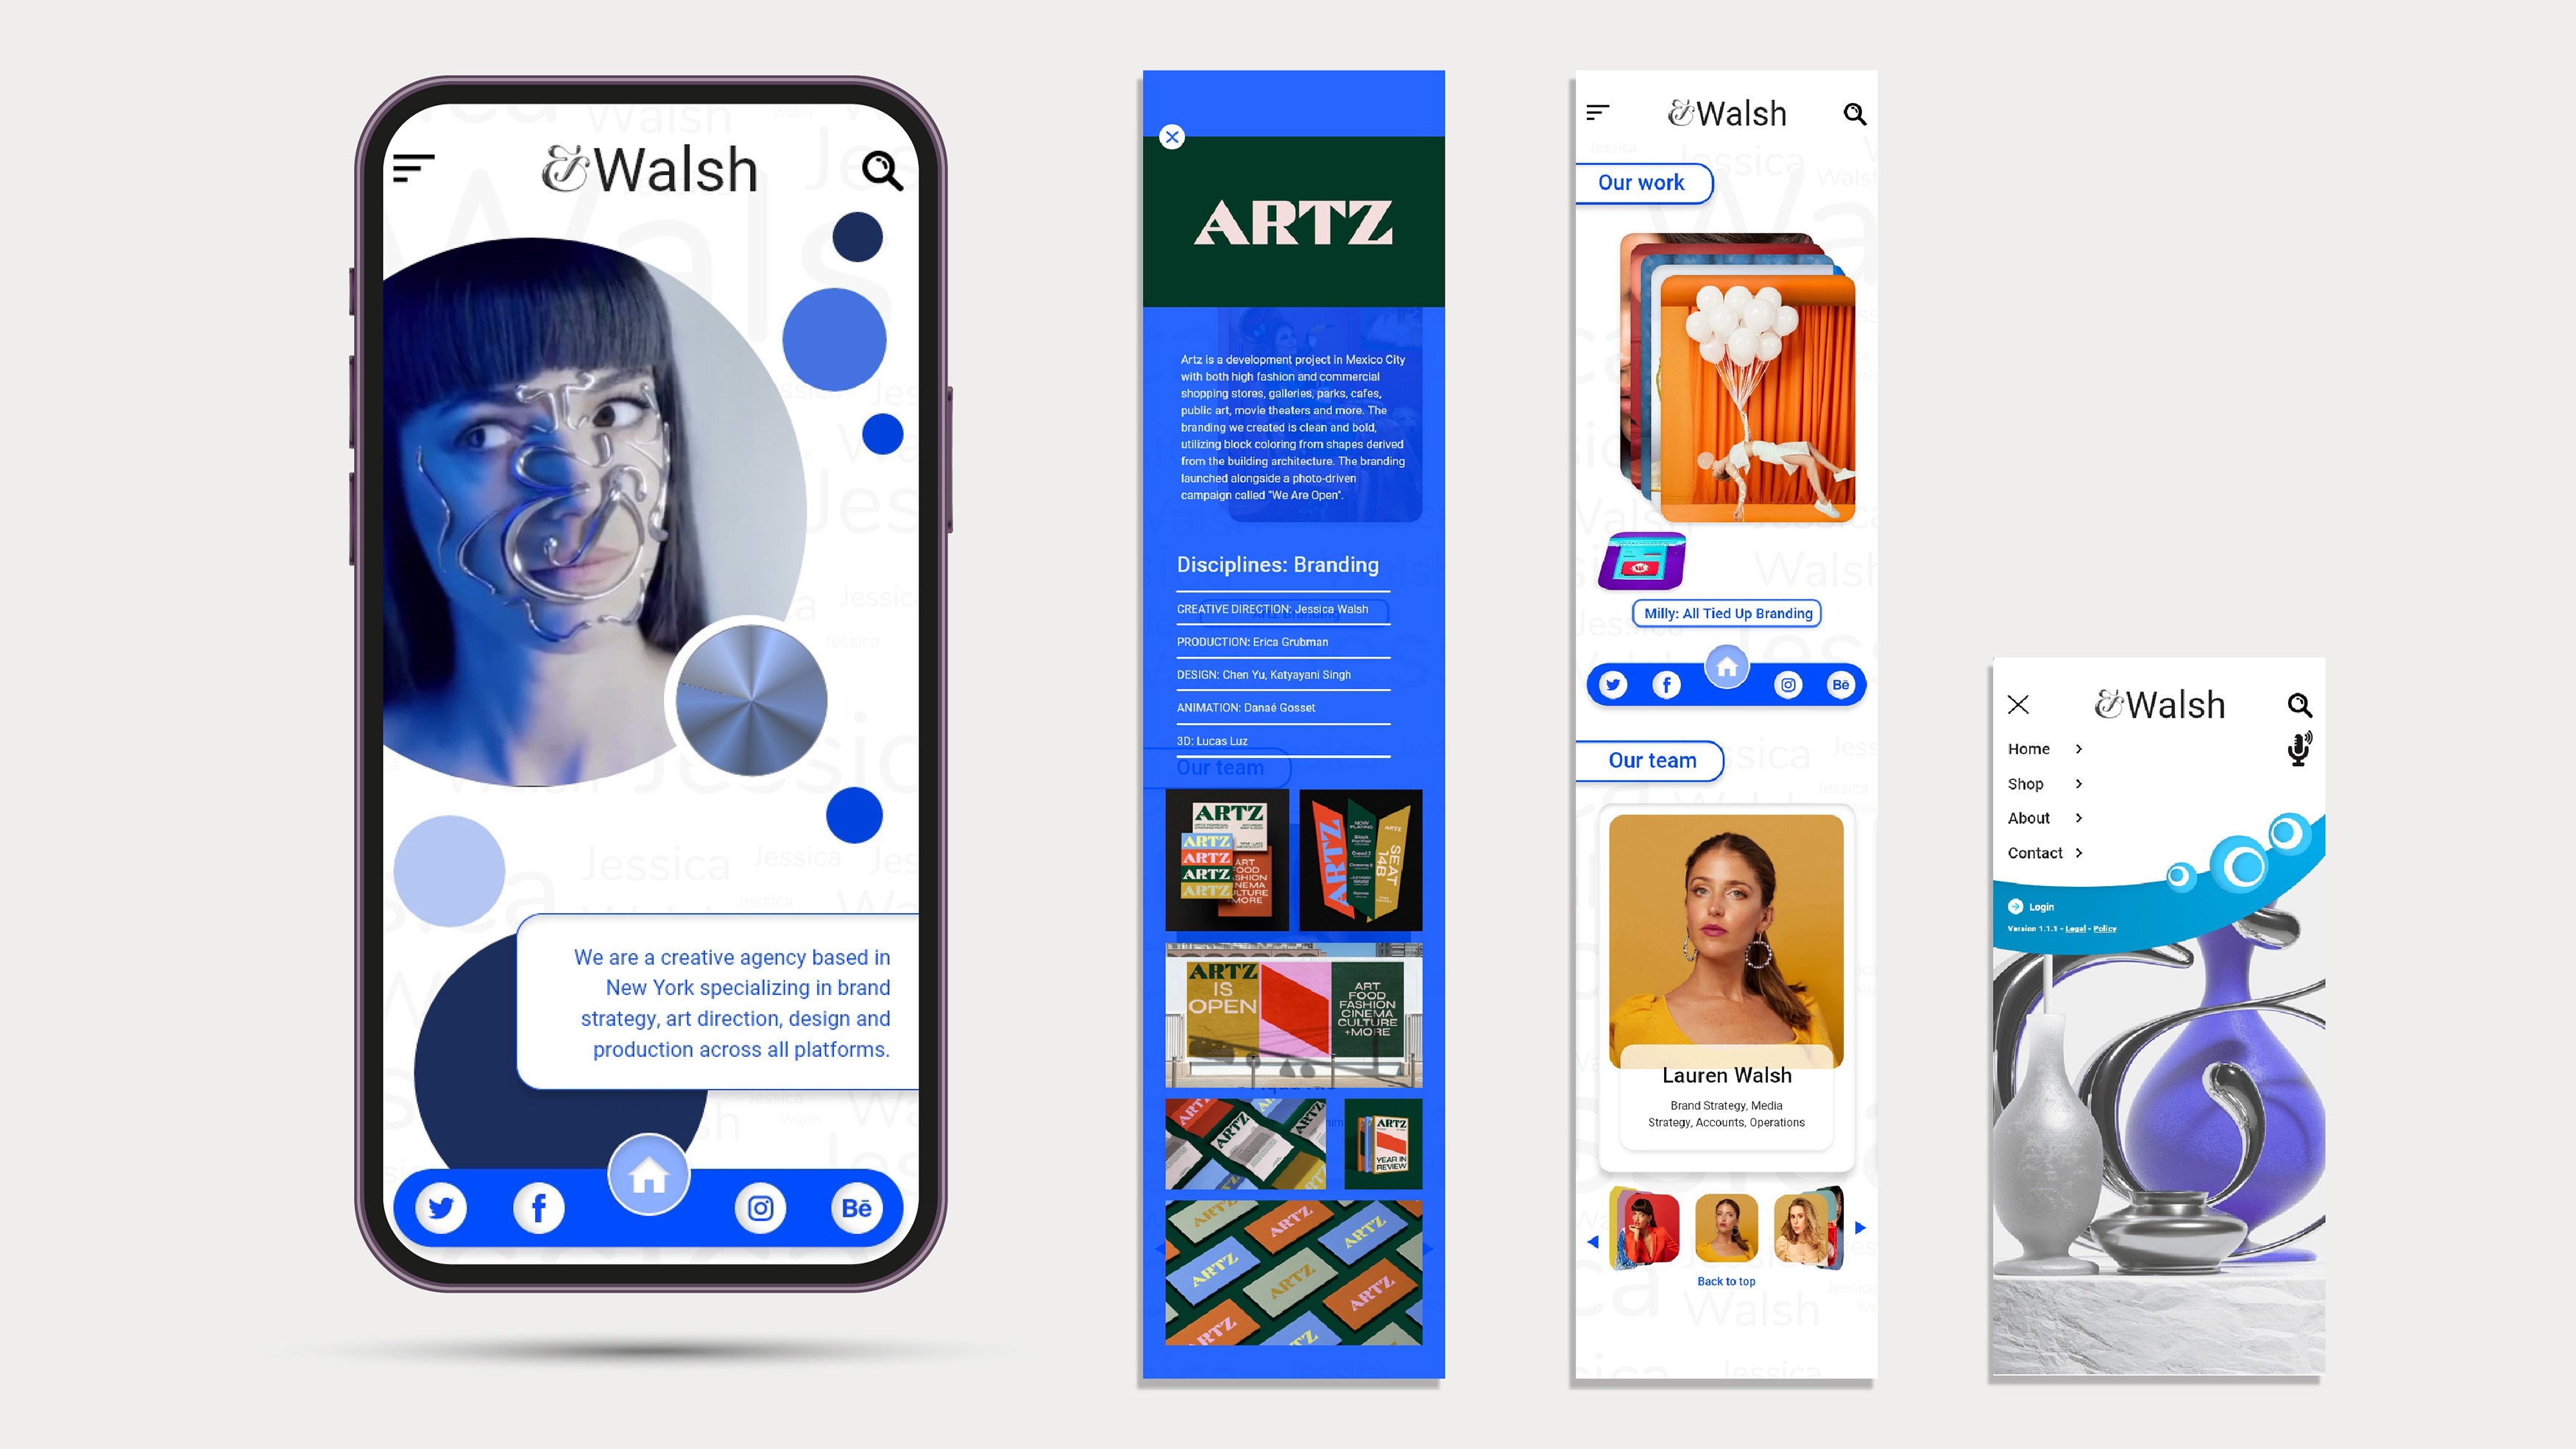 "&Walsh," mobile app design, / "&Walsh," mobile app design, digital, 2022. This project is to design a mobile app for the designer Jessica Walsh.